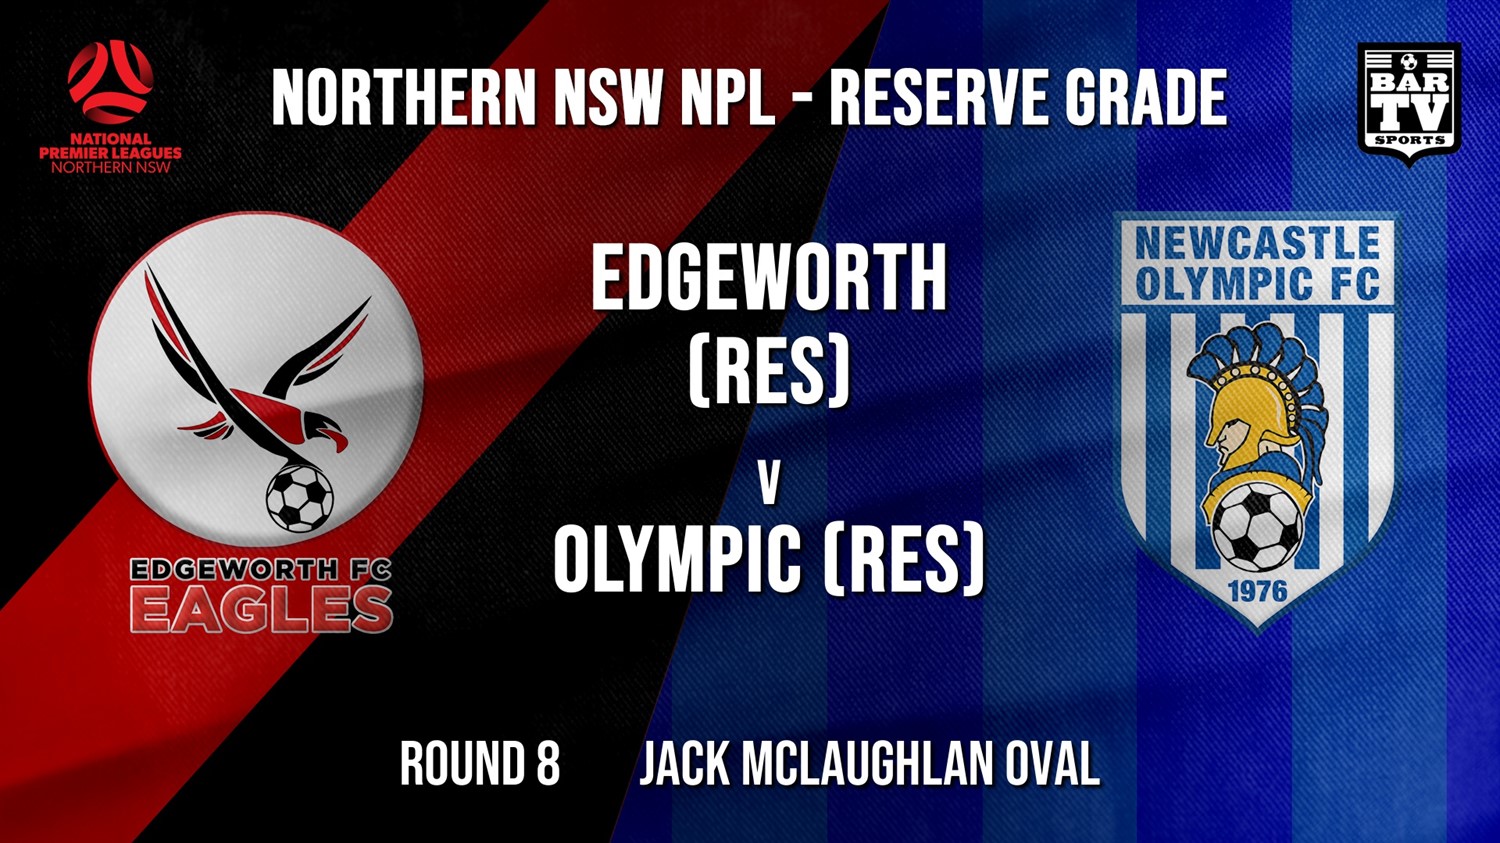 NPL NNSW RES Round 8 - Edgeworth Eagles (Res) v Newcastle Olympic (Res) Minigame Slate Image